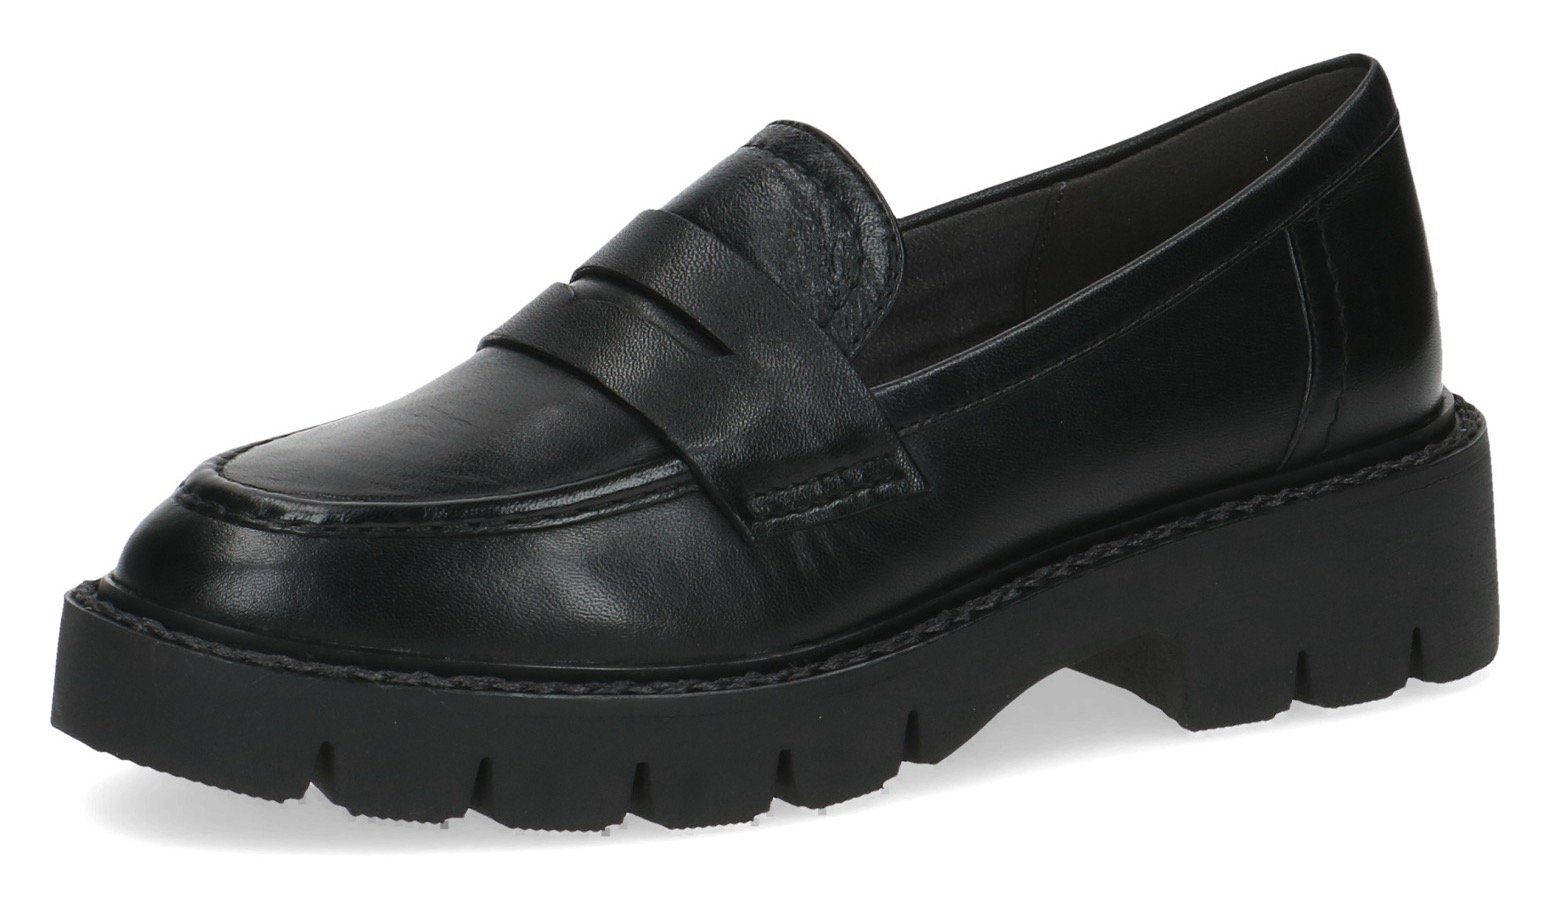 Caprice Loafers instappers